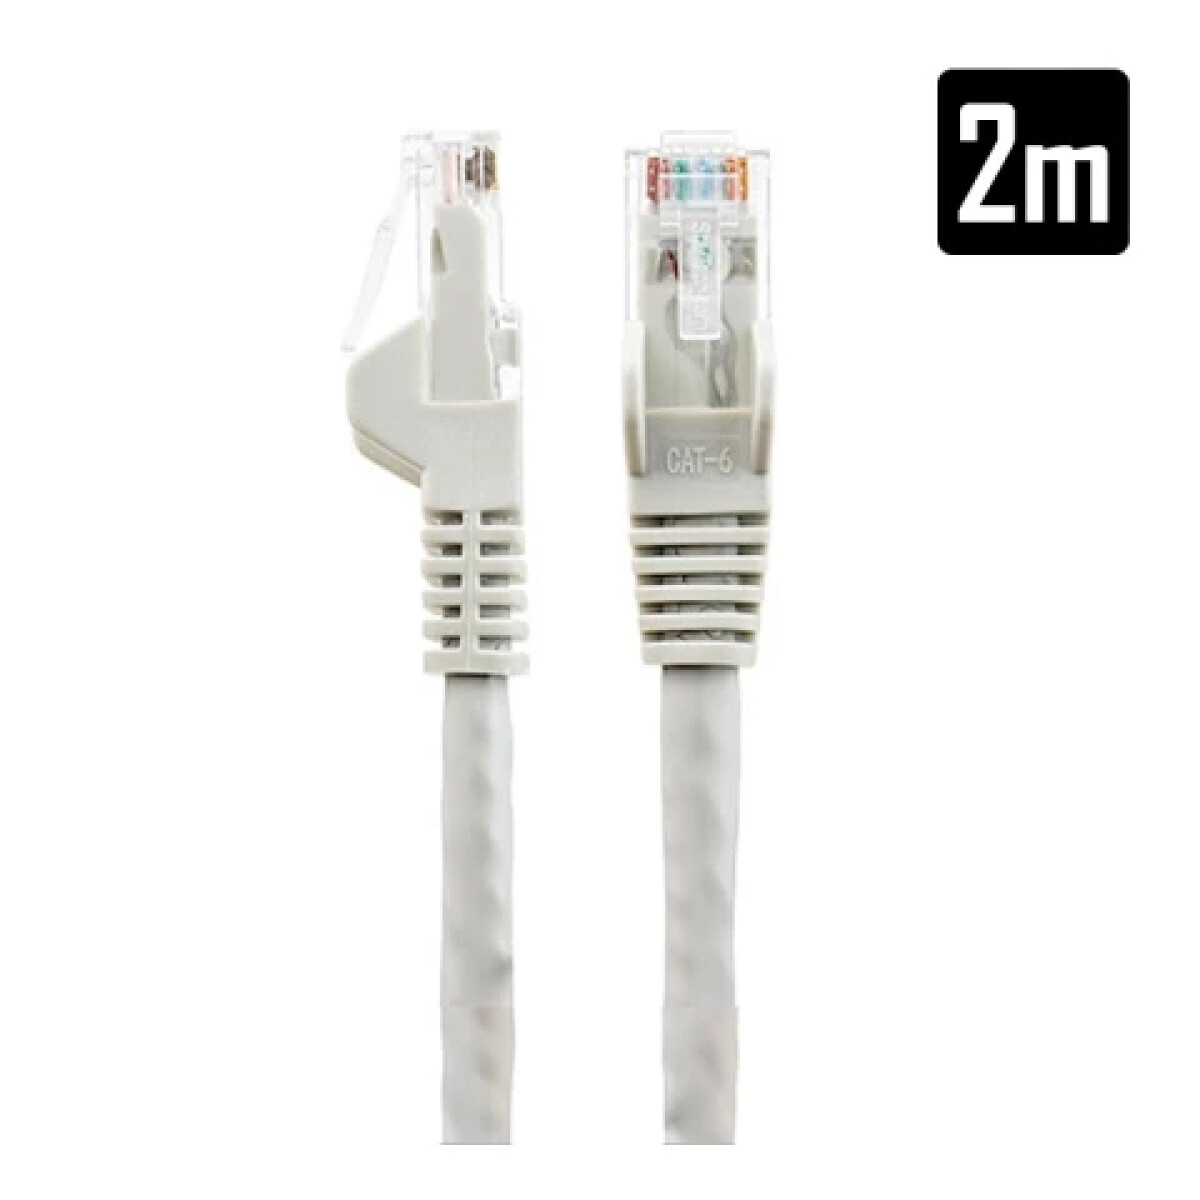 Cable de red Patch Cord CAT6 2M blanco Kolke - Unica 